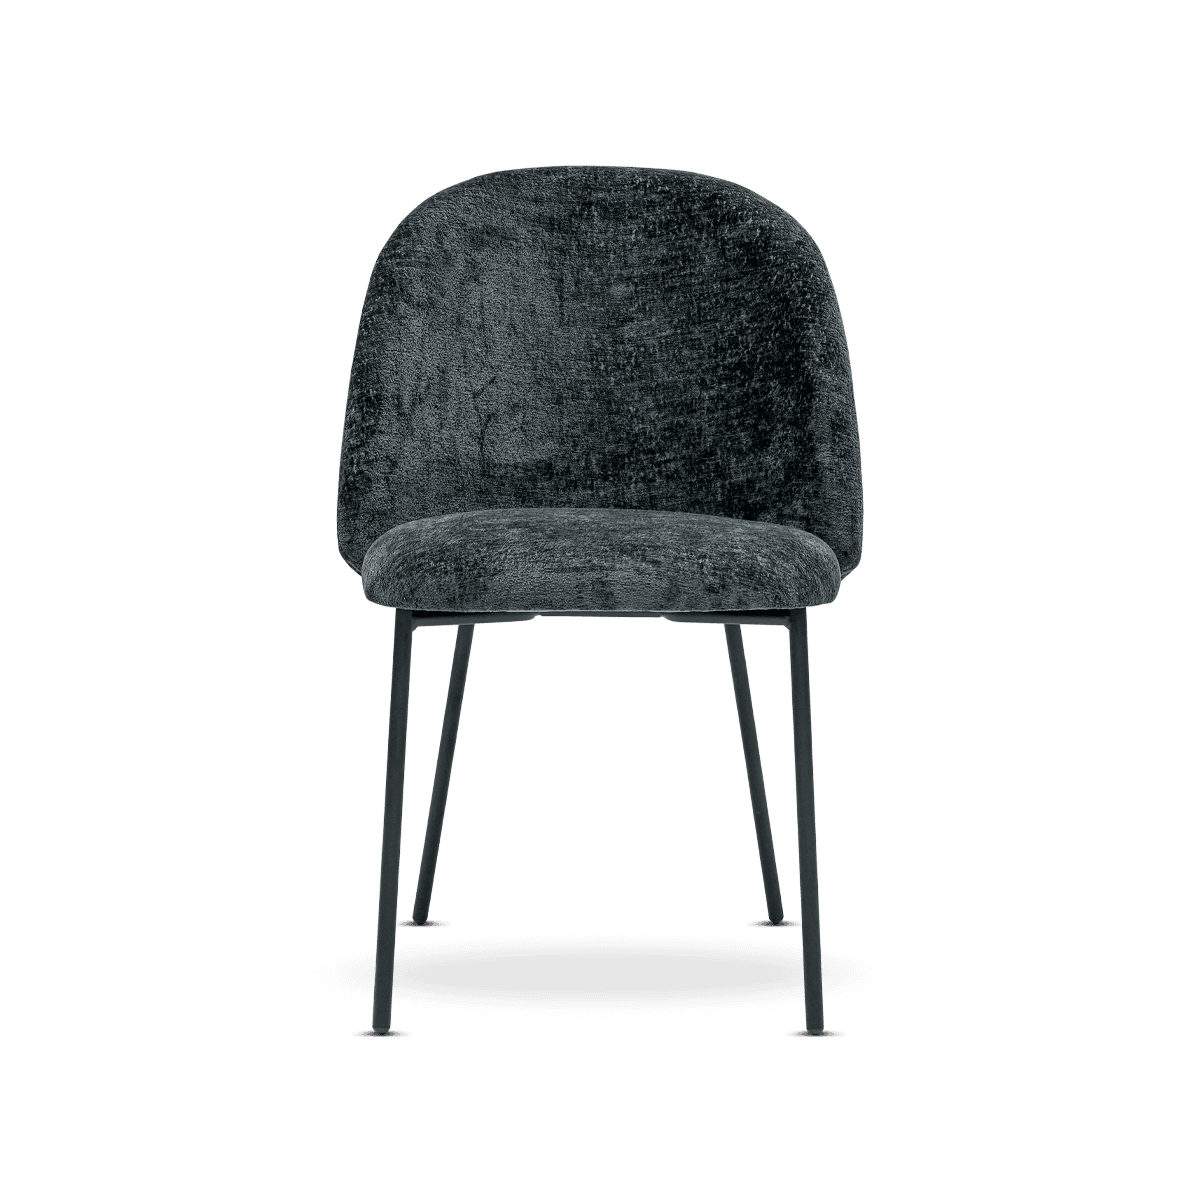 Tuka 2183 Dining Chair, Black/Anthracite